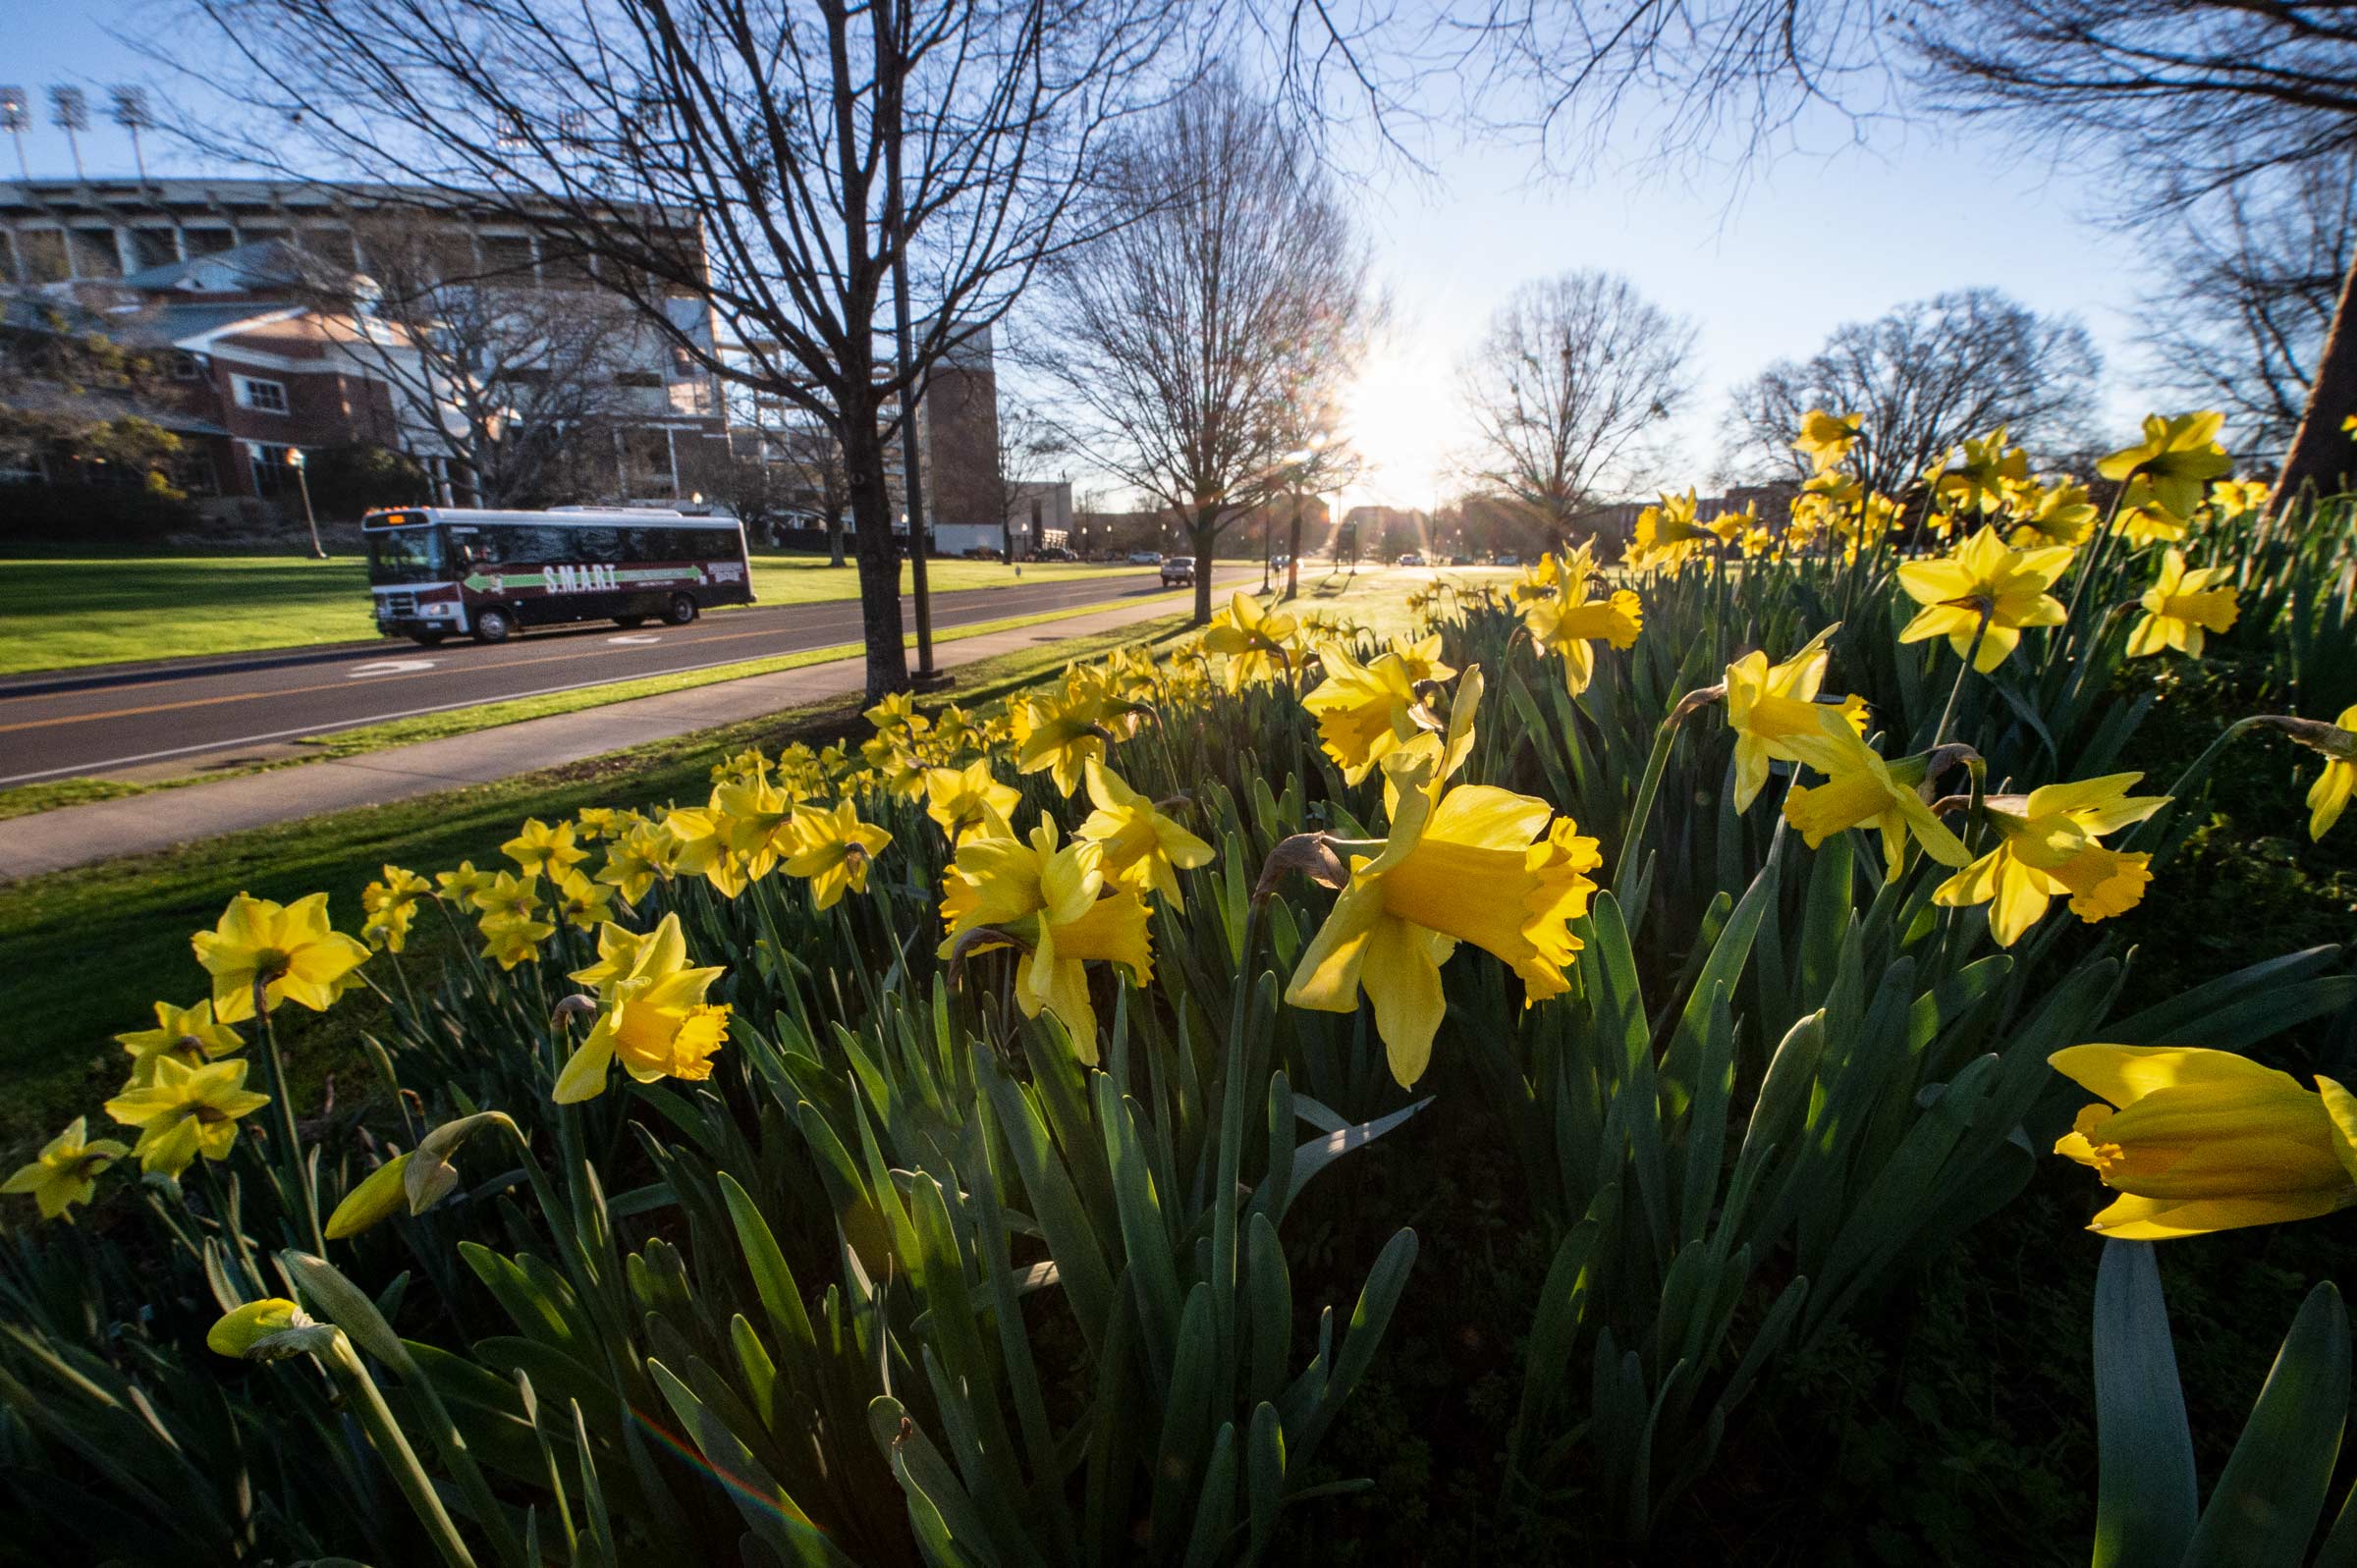 Morning daffodils at the amphitheater with SMART bus passing by.